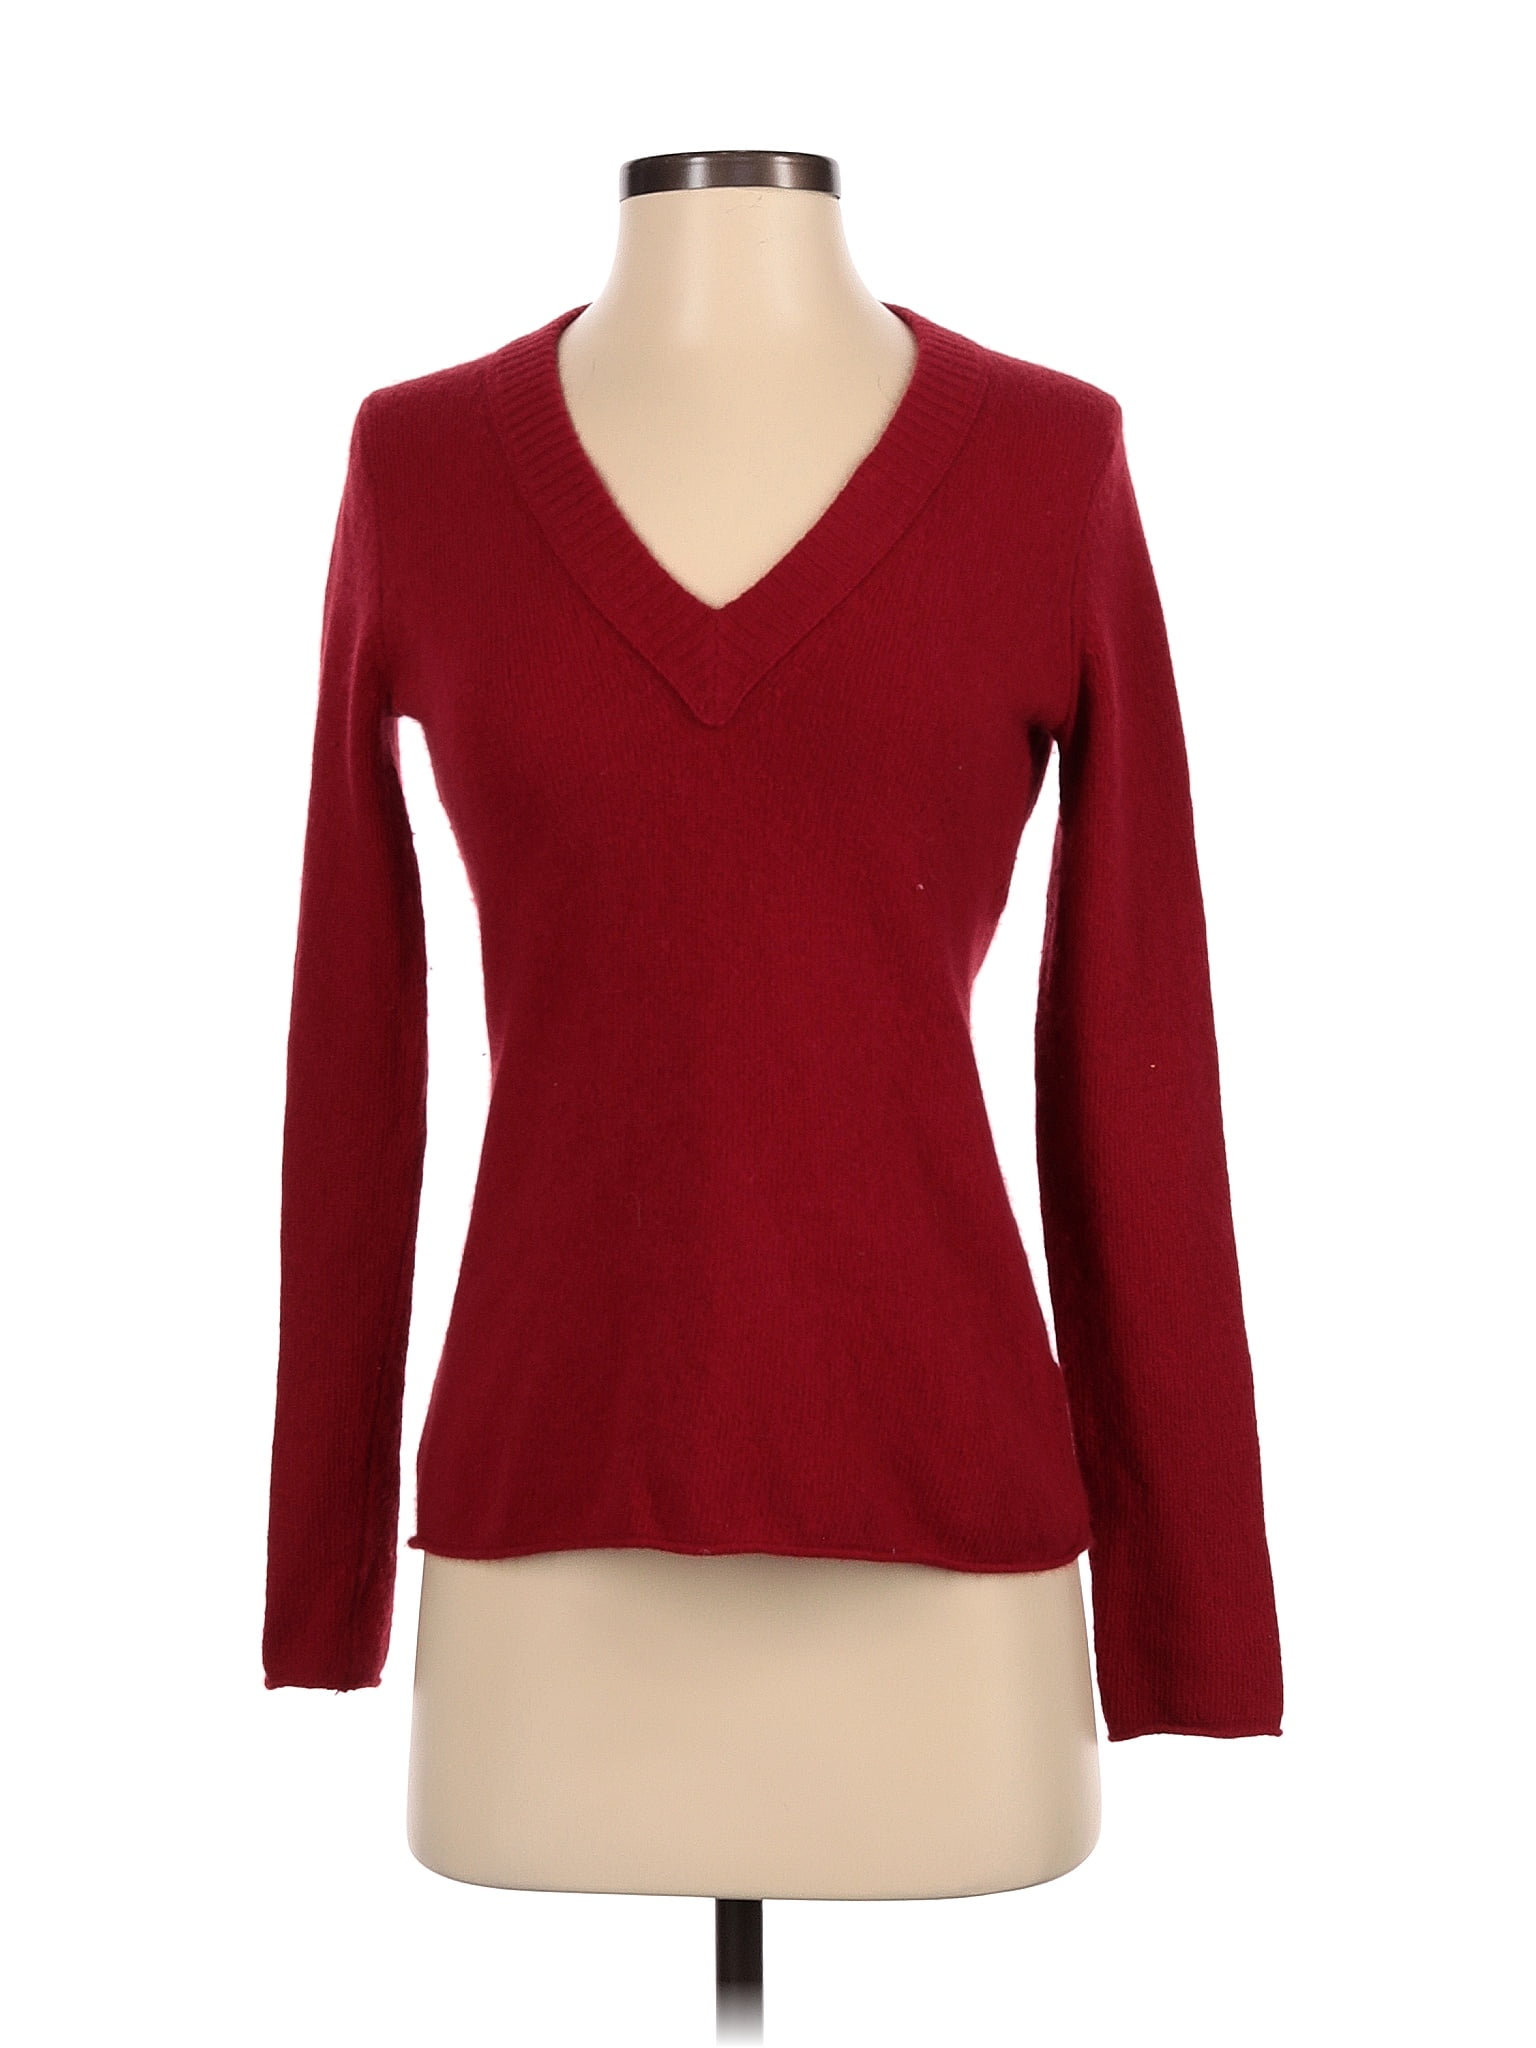 Banana Republic Color Block Solid Red Burgundy Pullover Sweater Size XS ...